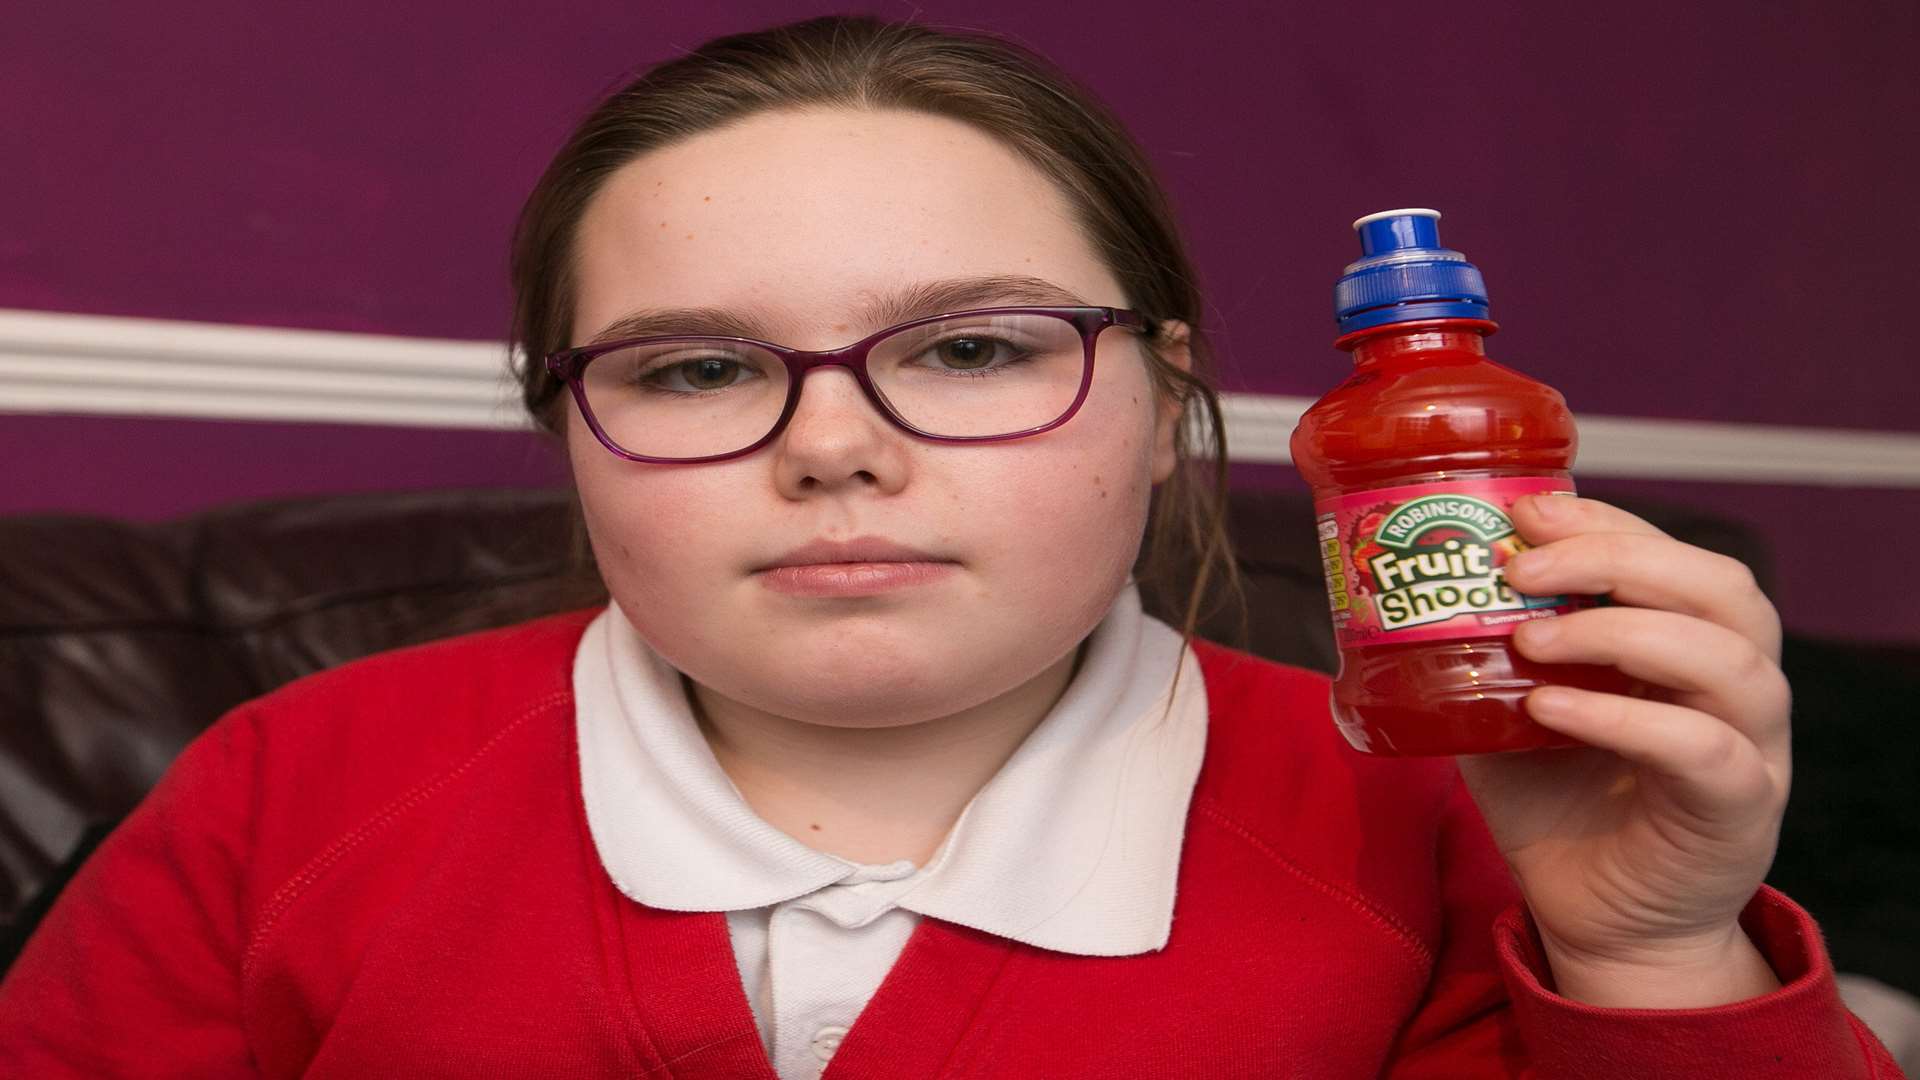 Ellie Robinson-Smith says she became sick when she drank the Fruit Shoot. Picture: SWNS.